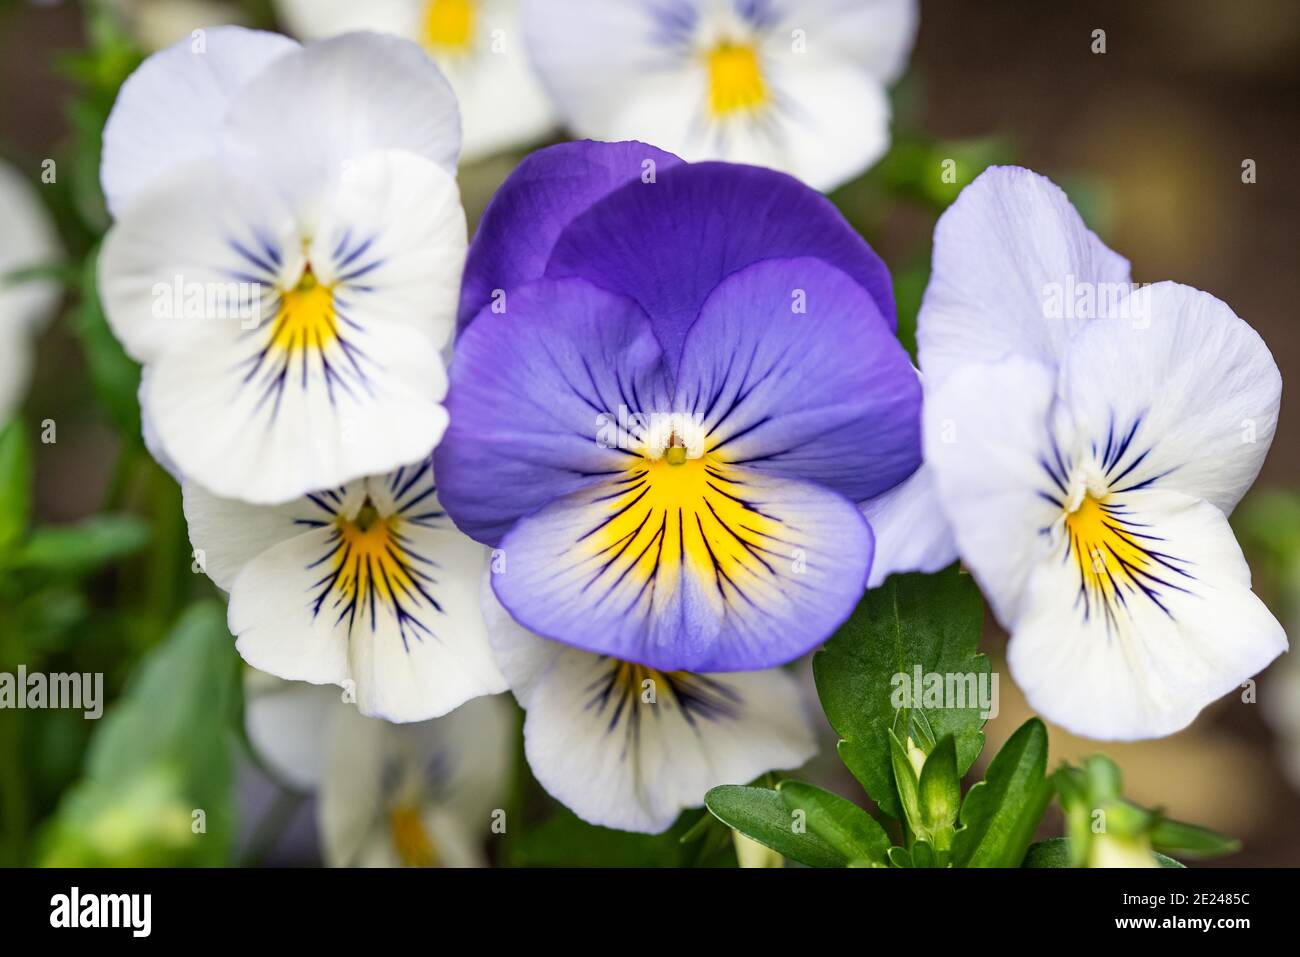 White and violet pansy in a garden Stock Photo